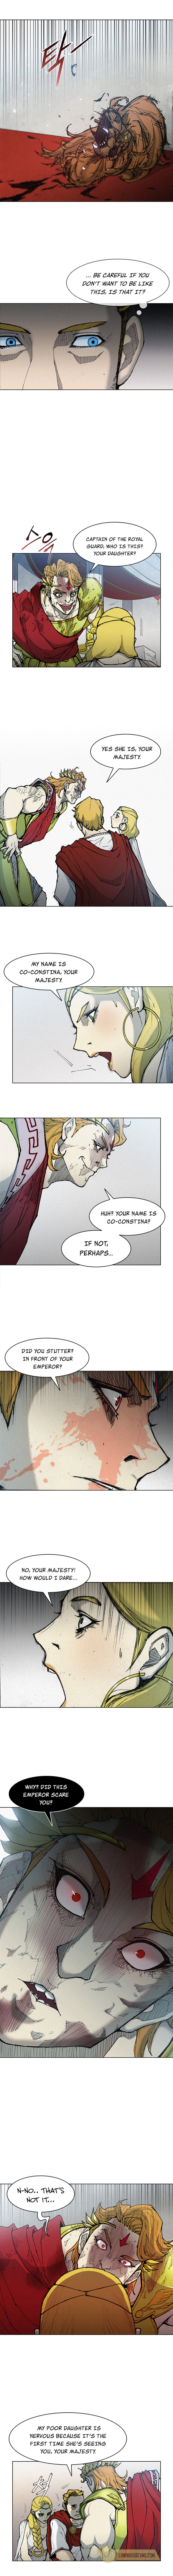 Long Way of the Warrior - Chapter 16 Page 9